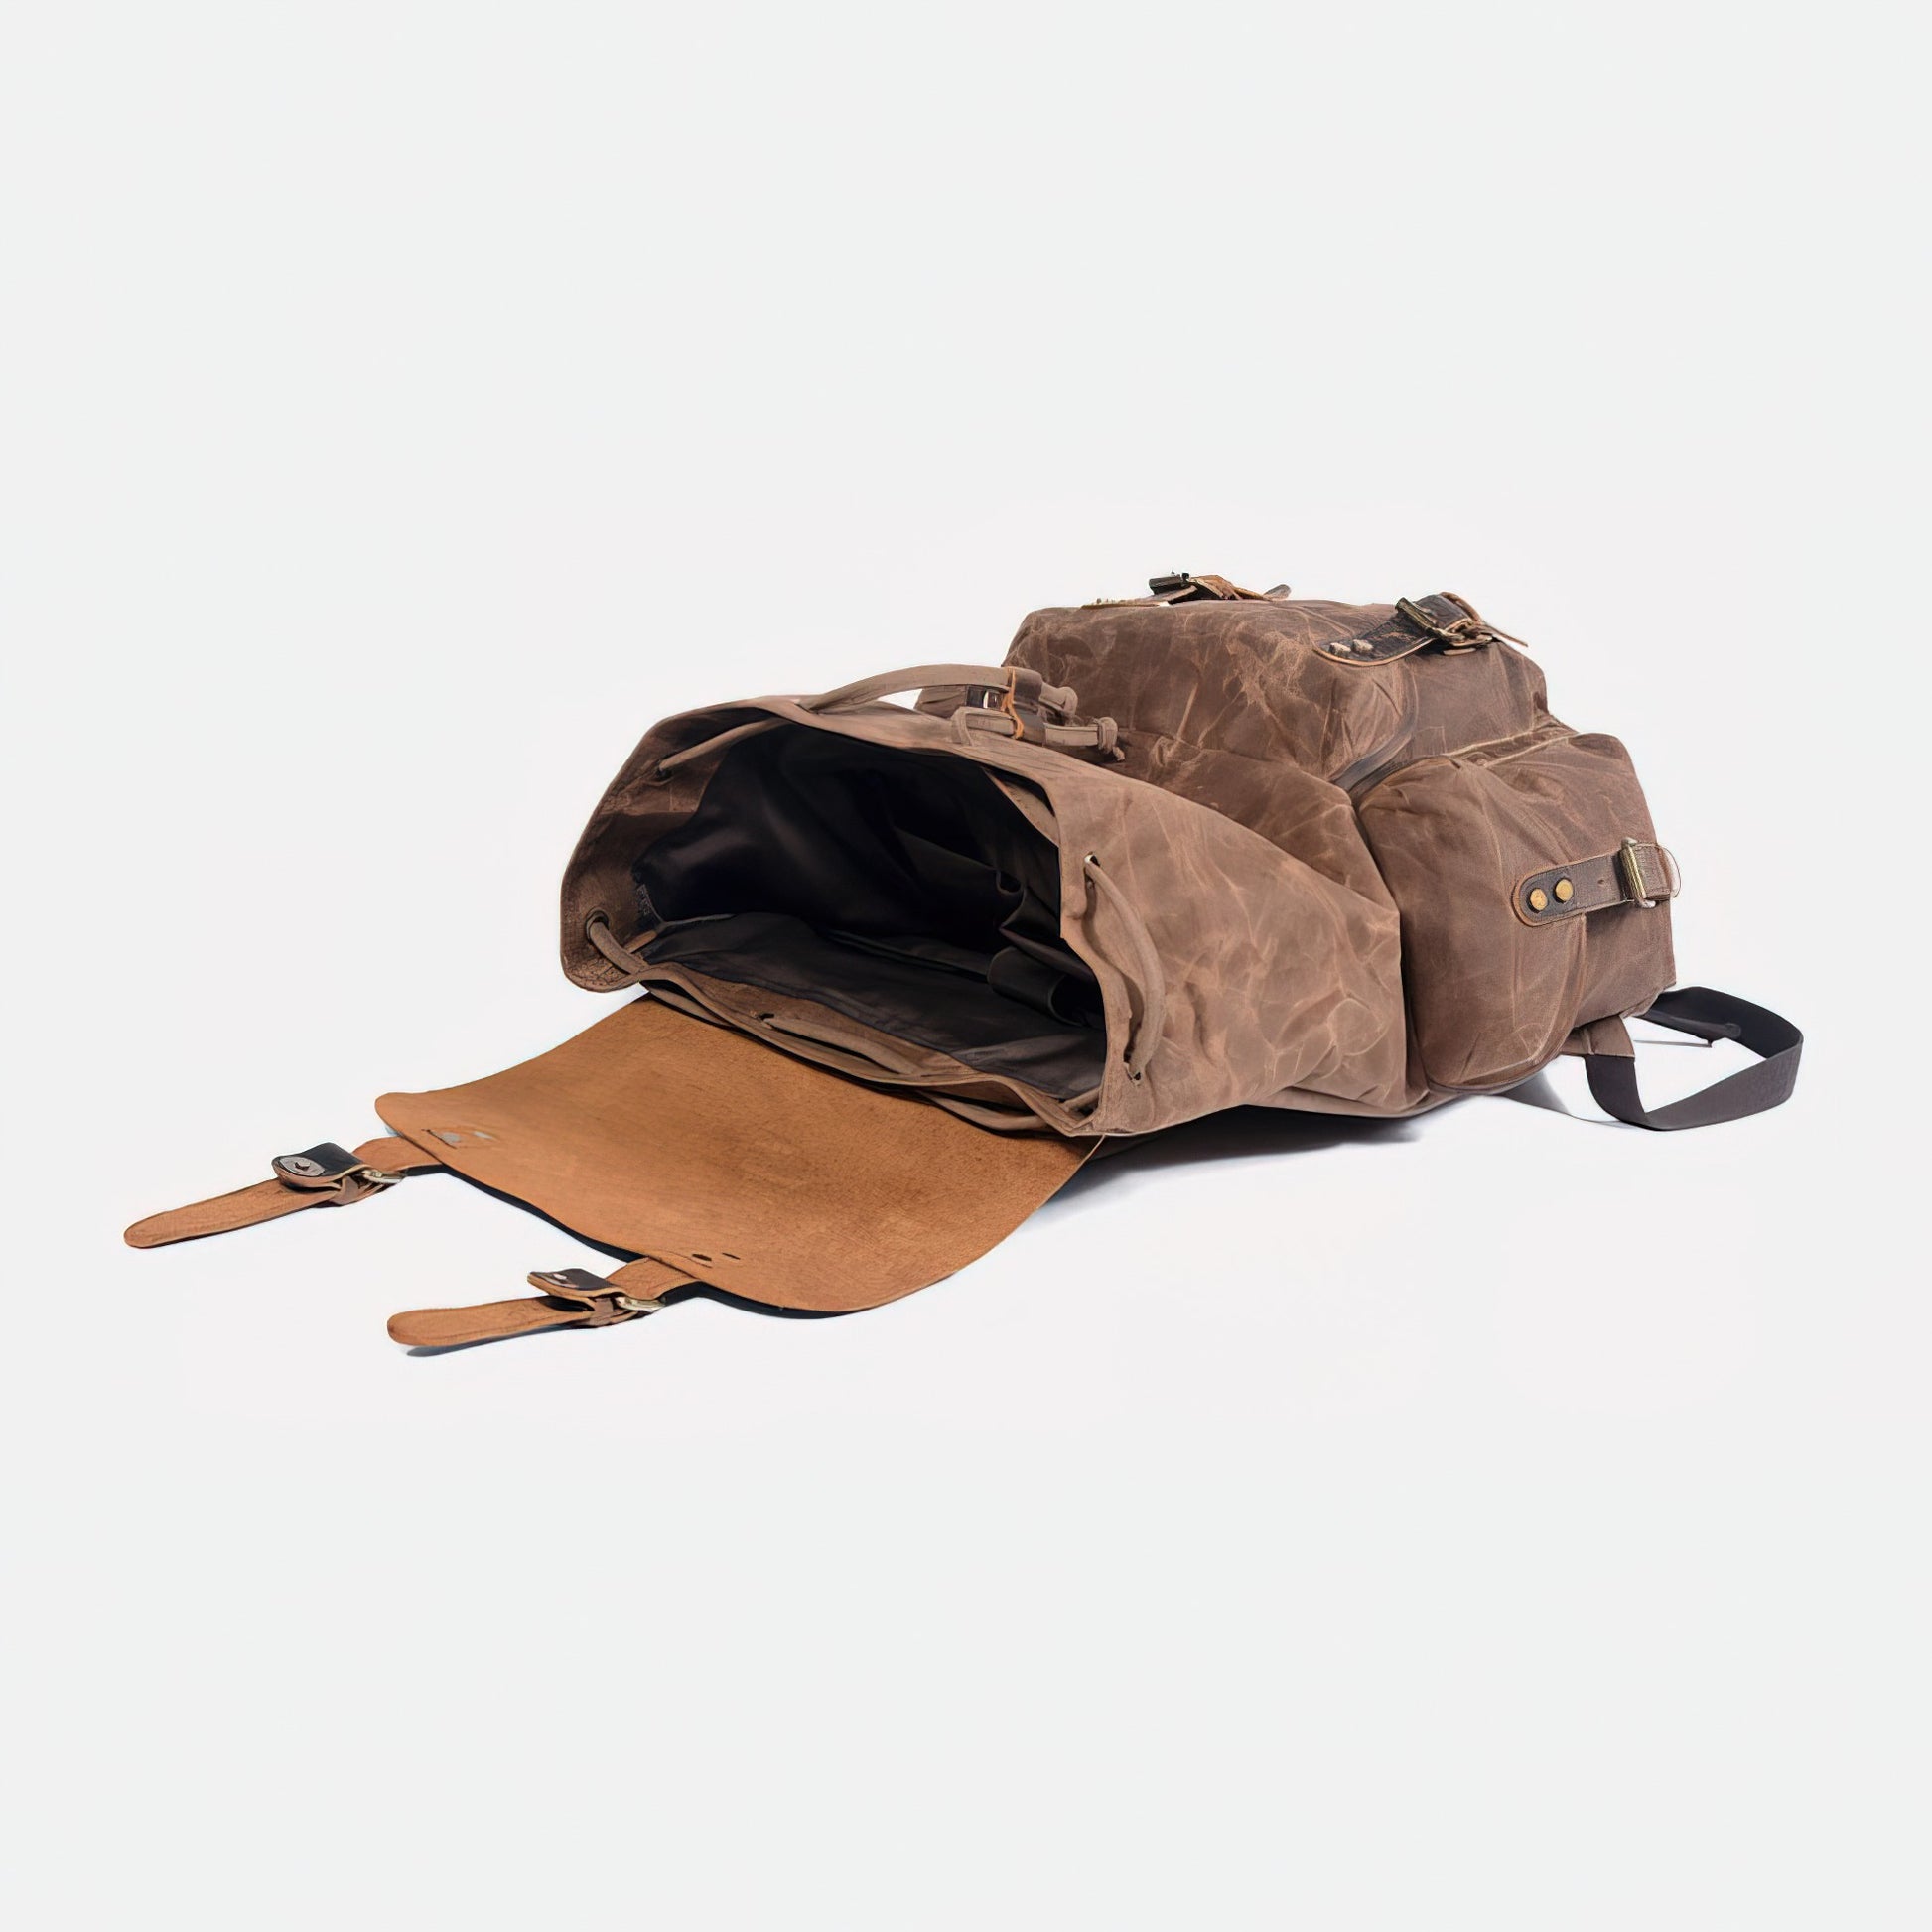 High Capacity Retro Waxed Canvas Leather Backpack